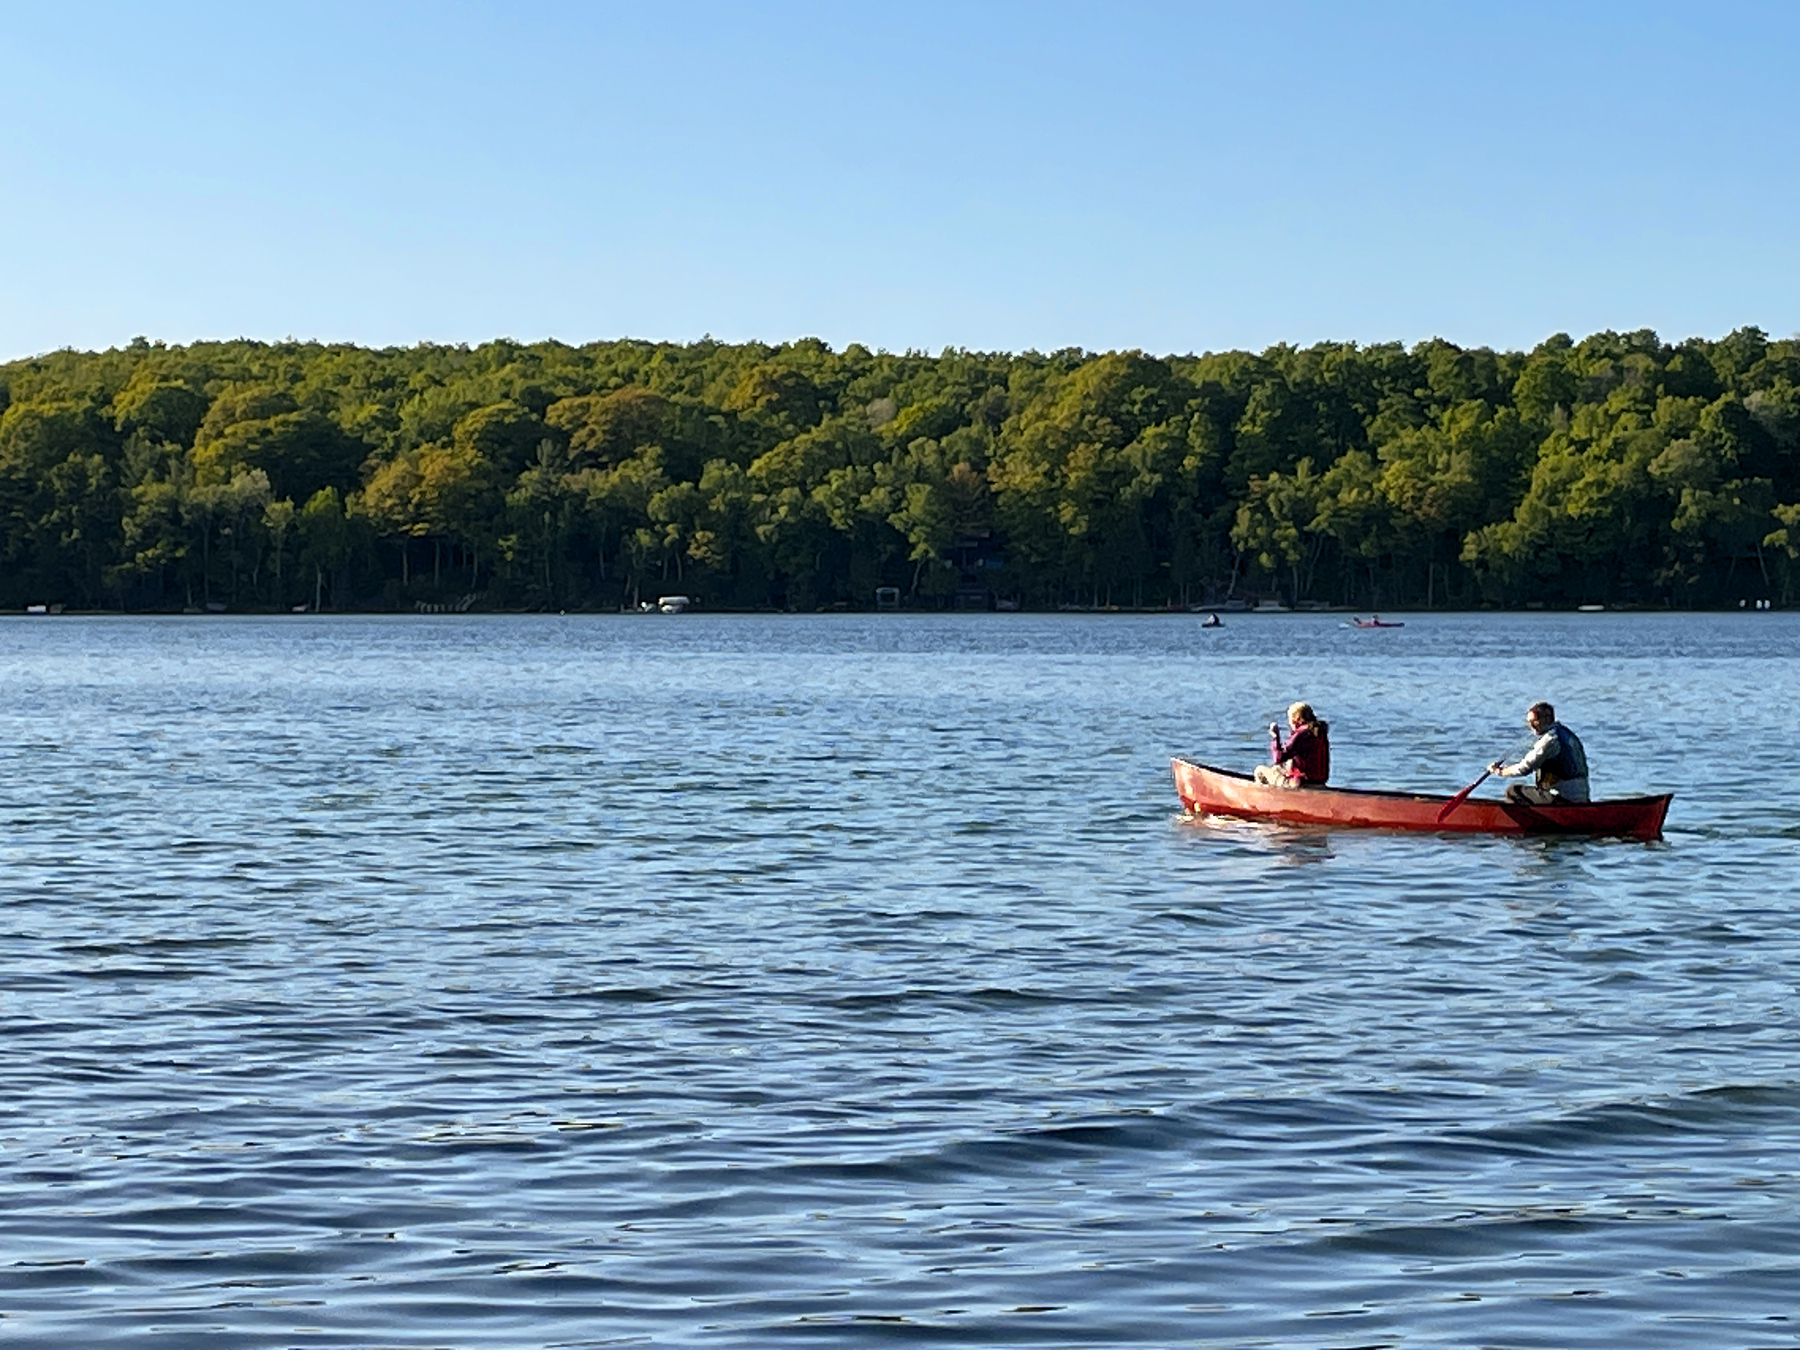 Two people paddling a canoe on a lake with trees on the far shore